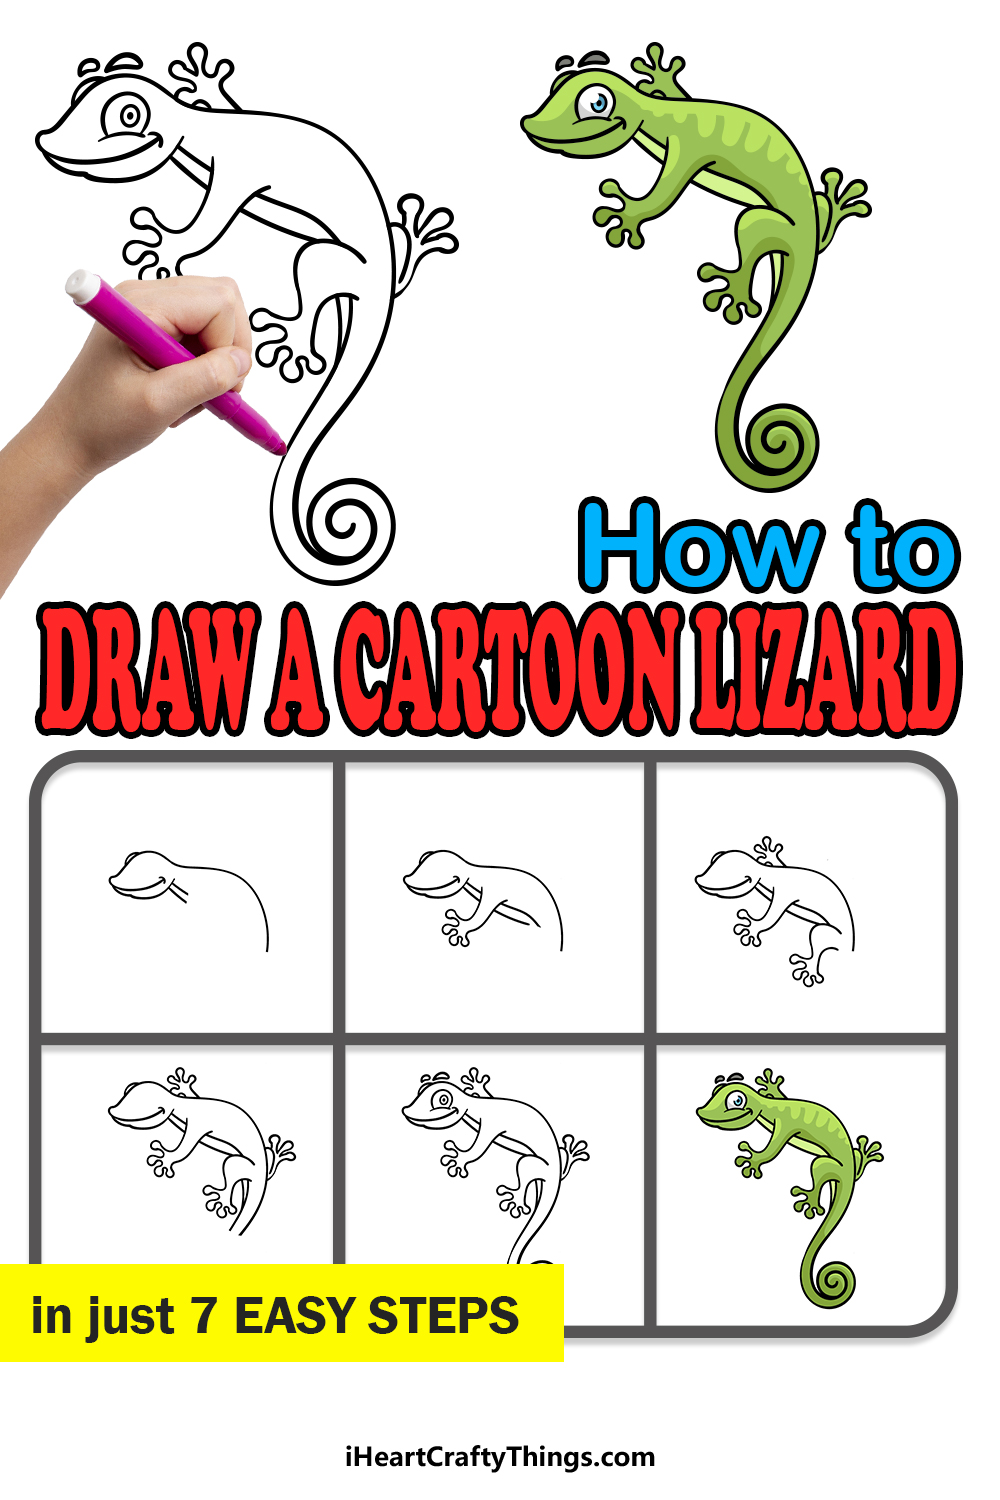 how to draw a cartoon lizard in 7 easy steps